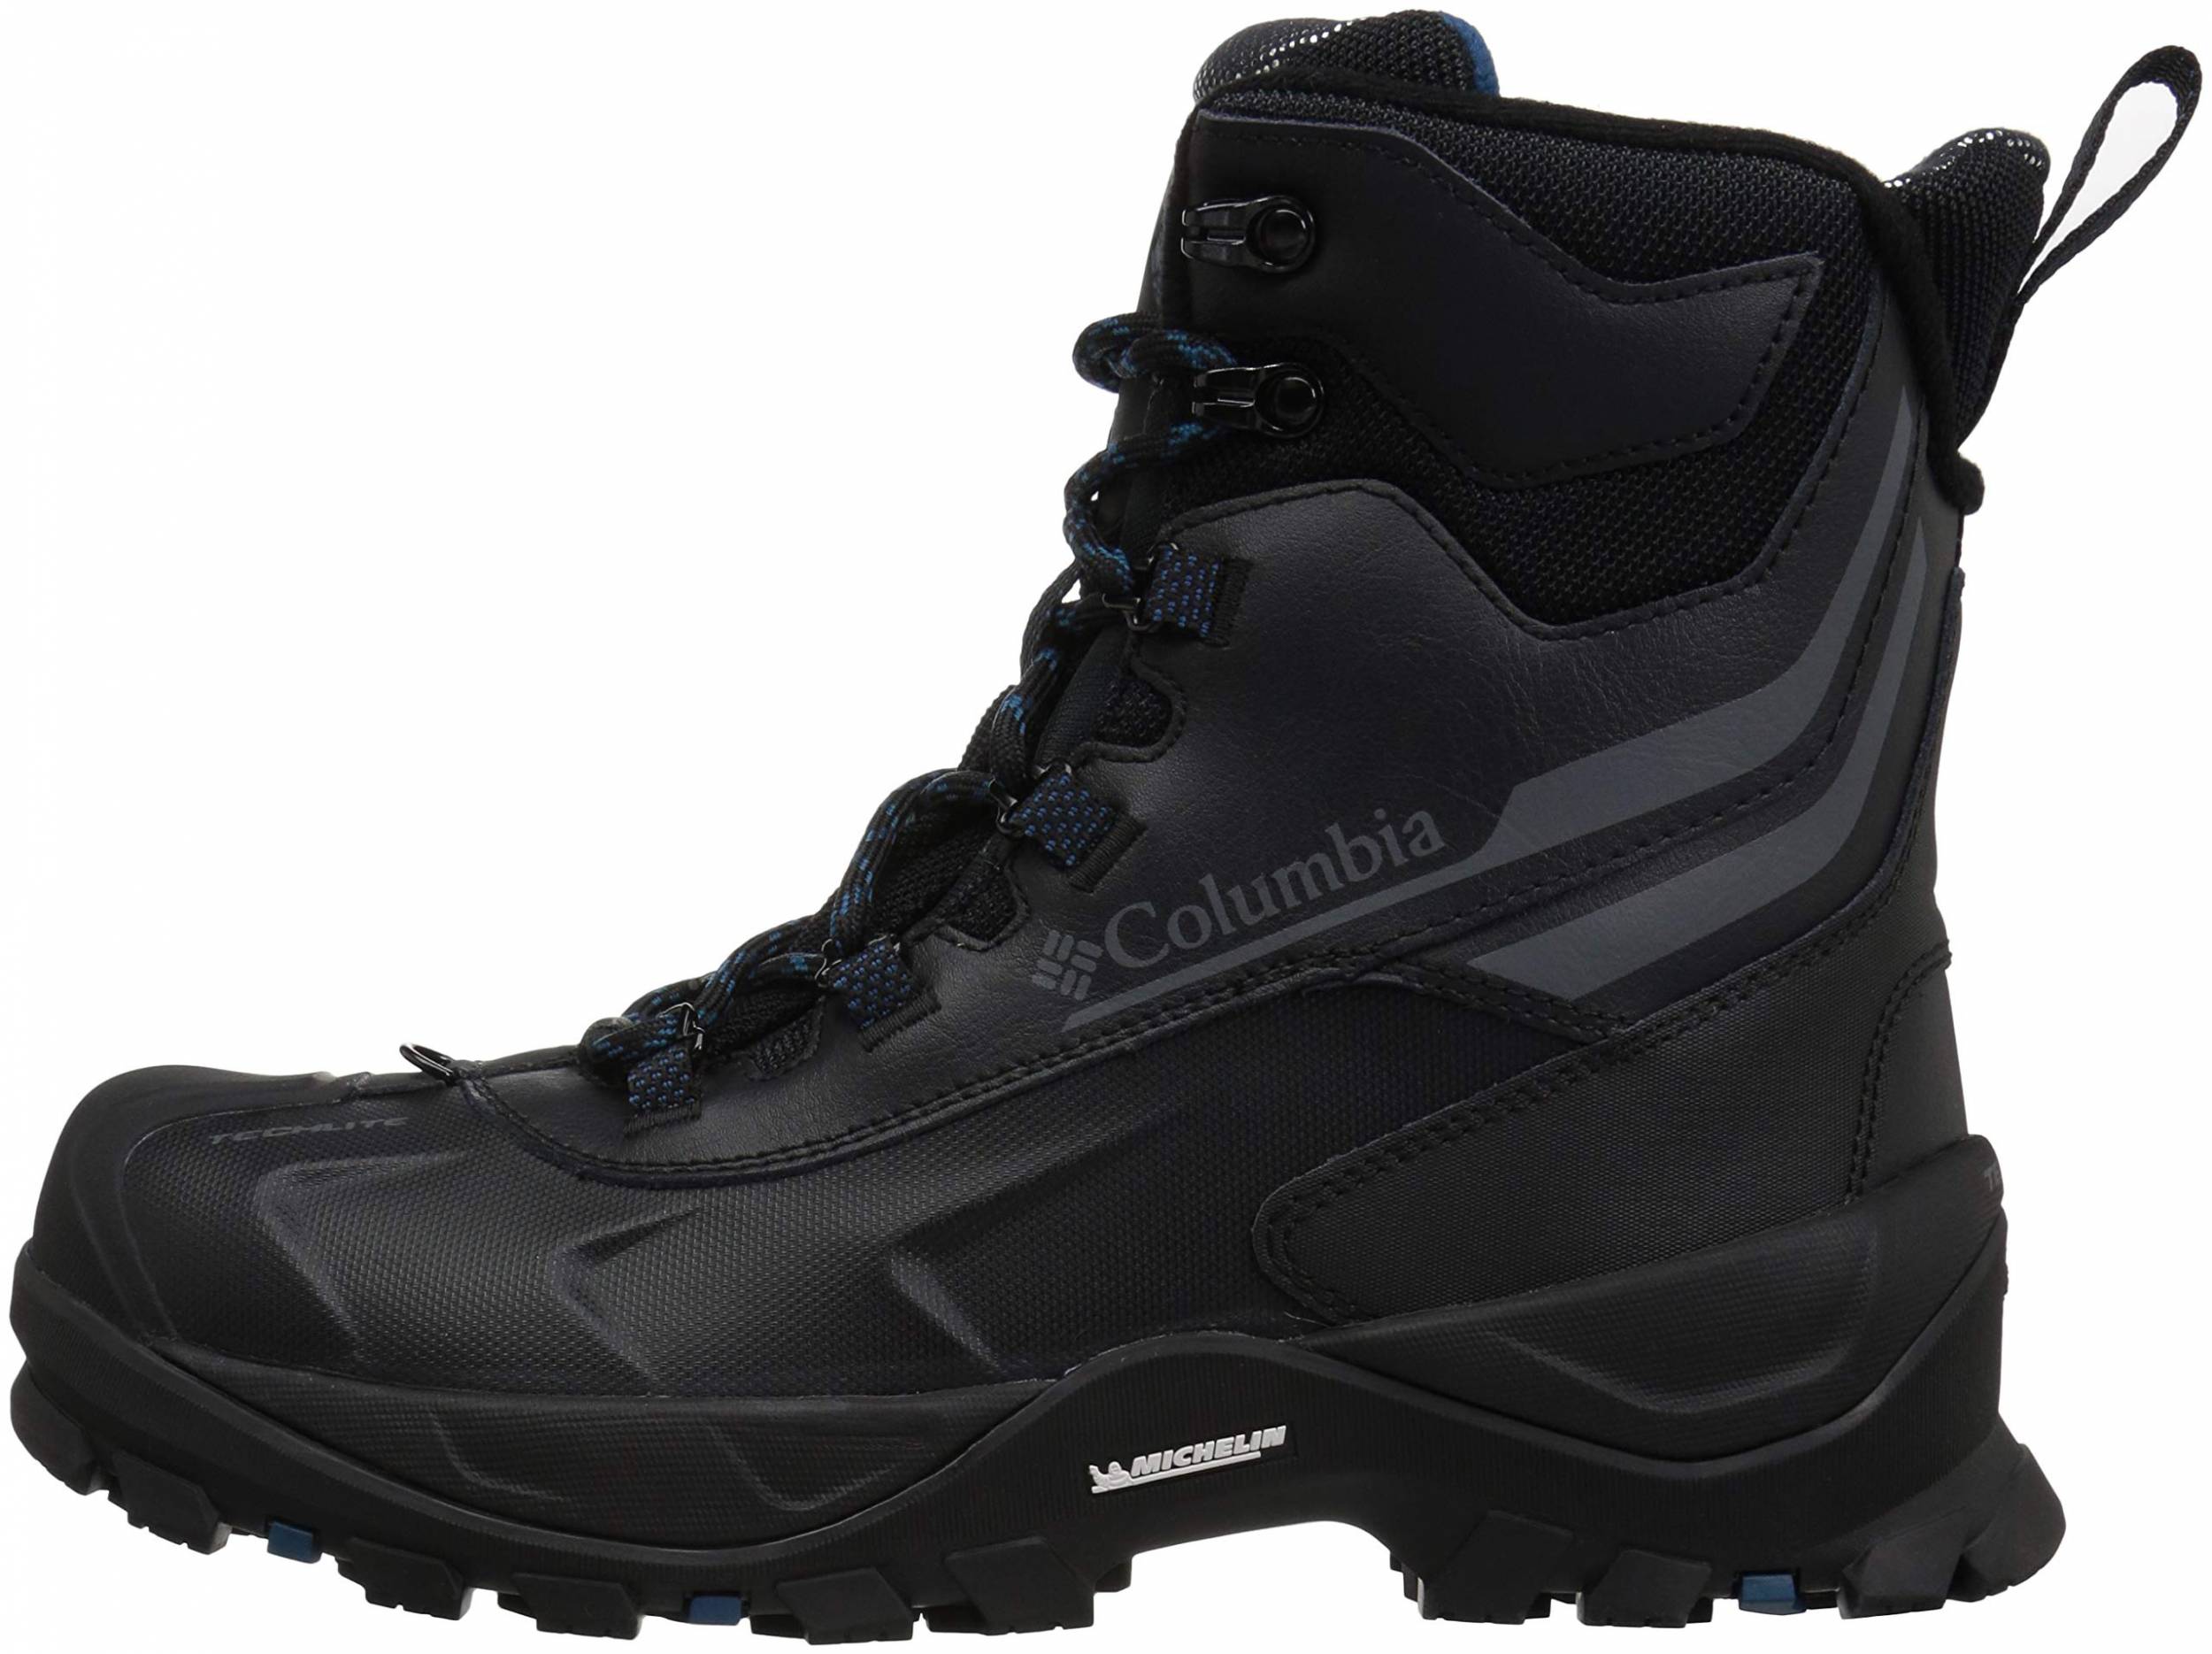 Save 30% on Winter Hiking Boots (63 